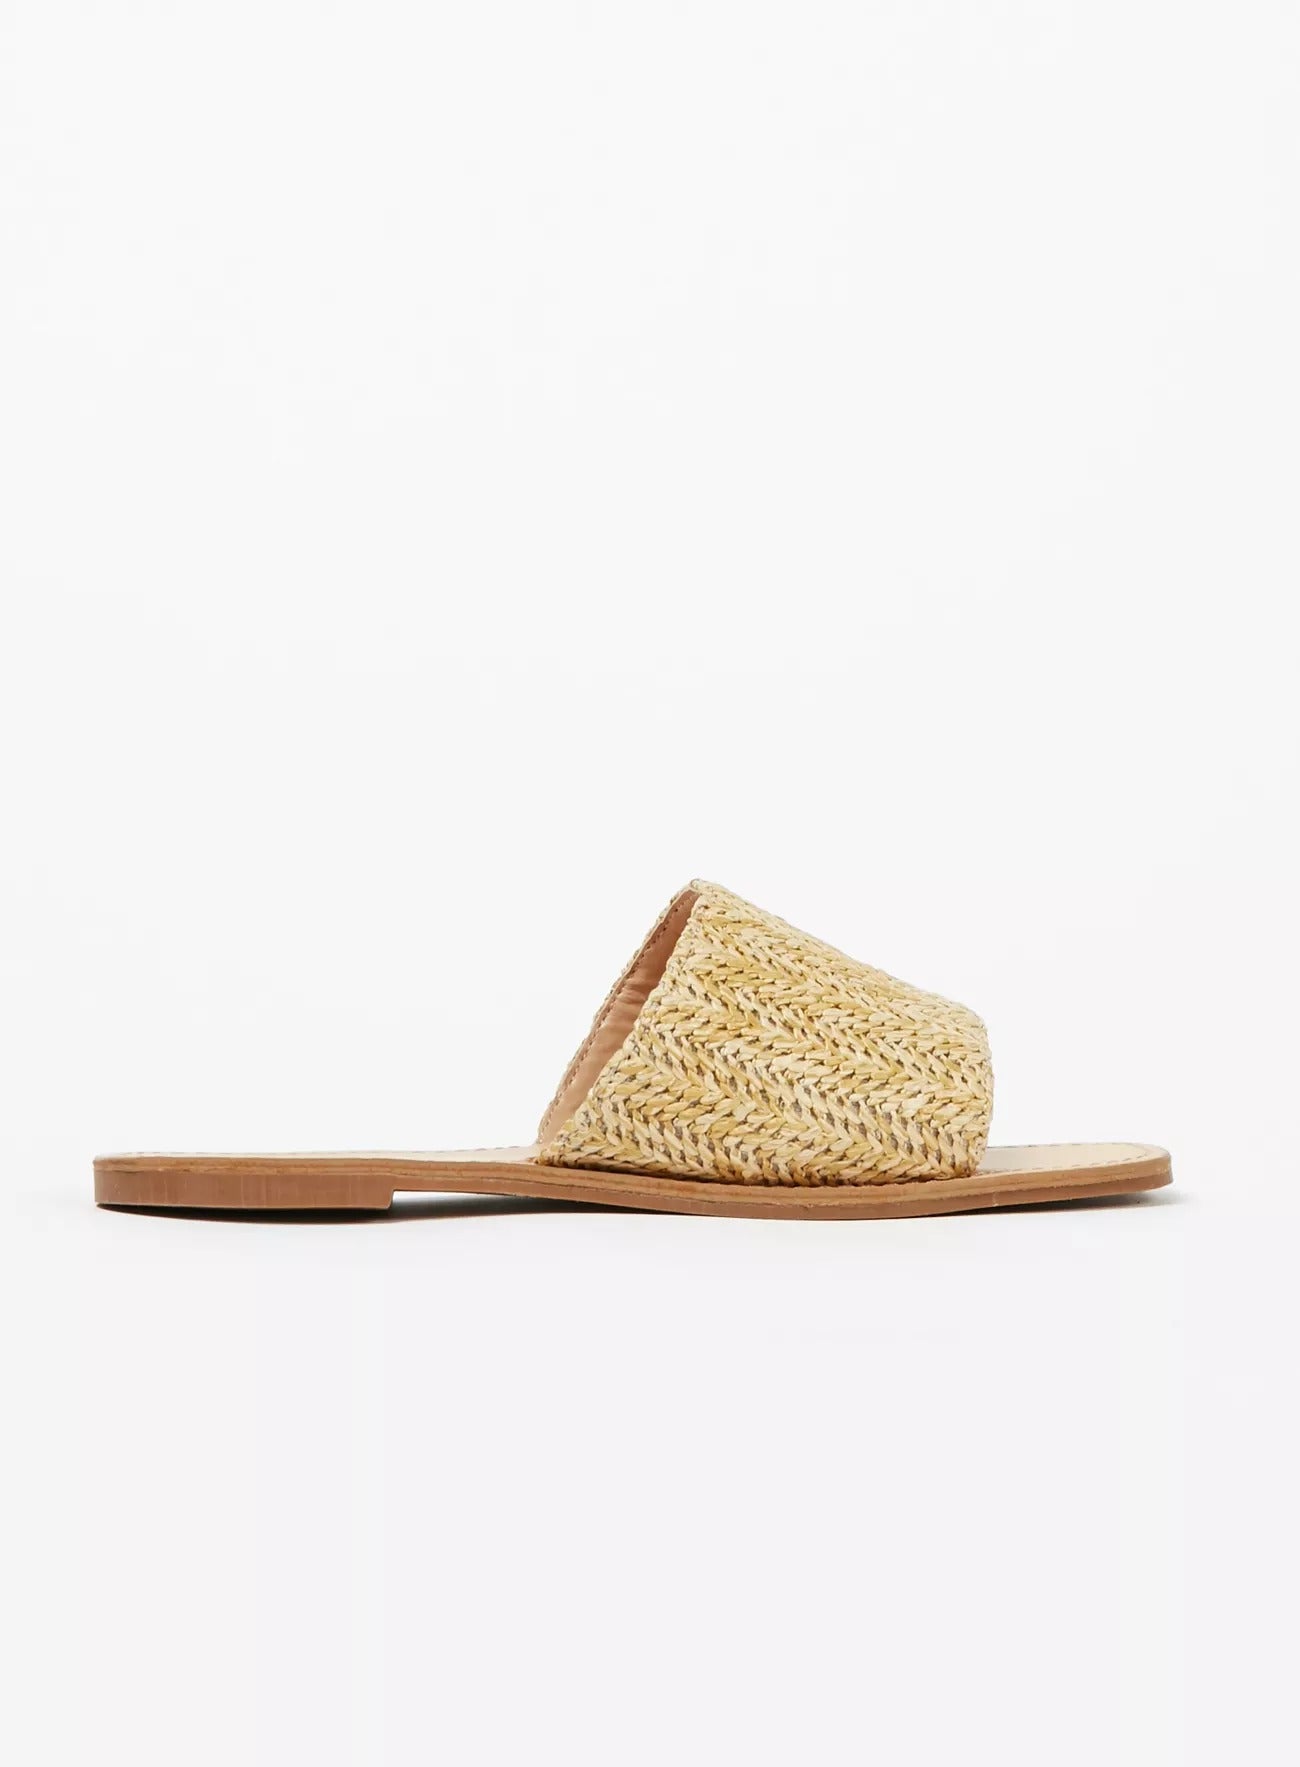 extra wide slip on sandals